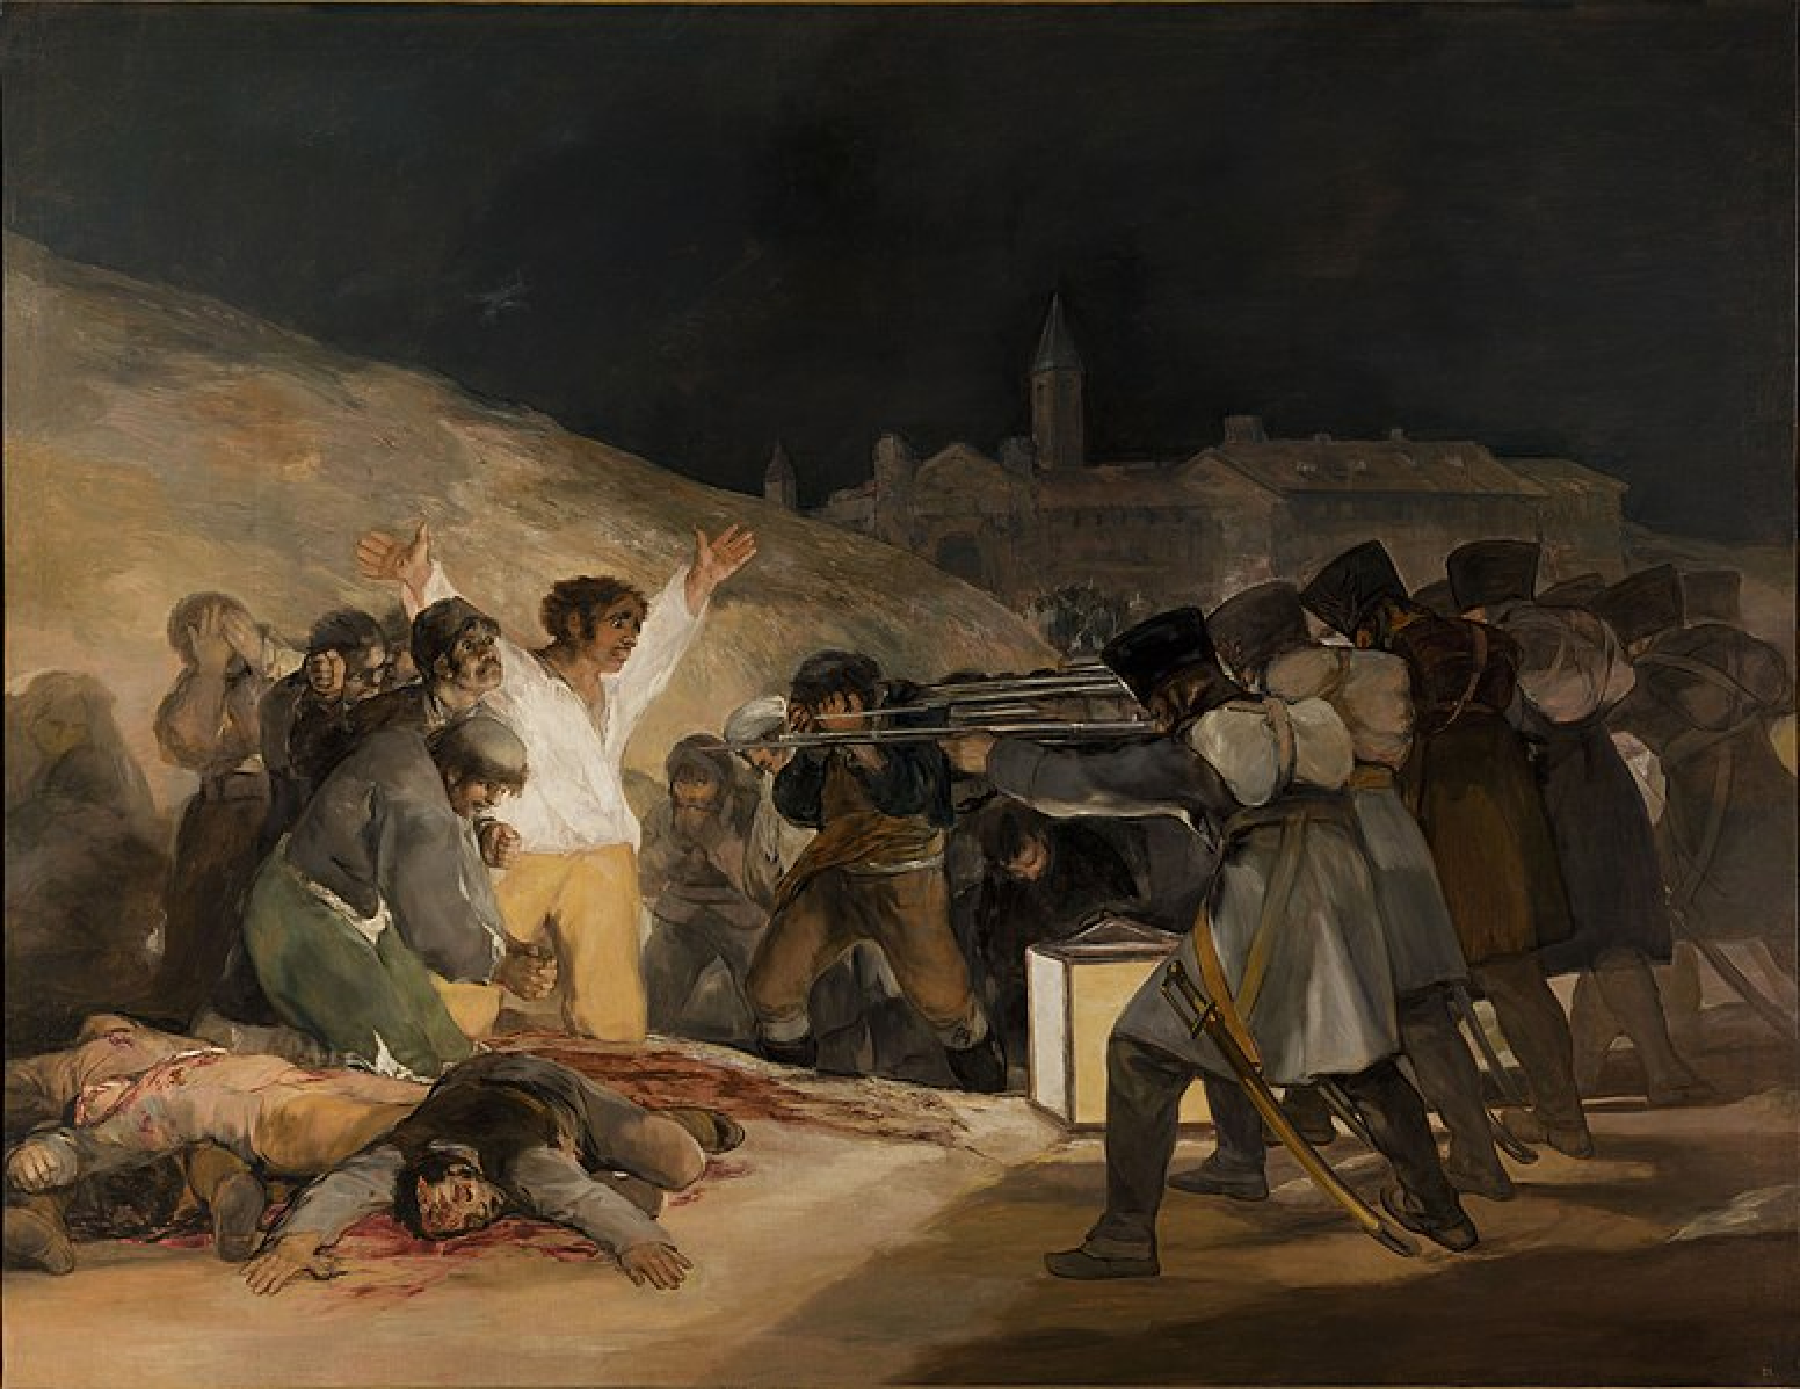 Several soldiers point guns at civilians. A pile of dead civilians lies at their feet. There is blood on the ground.